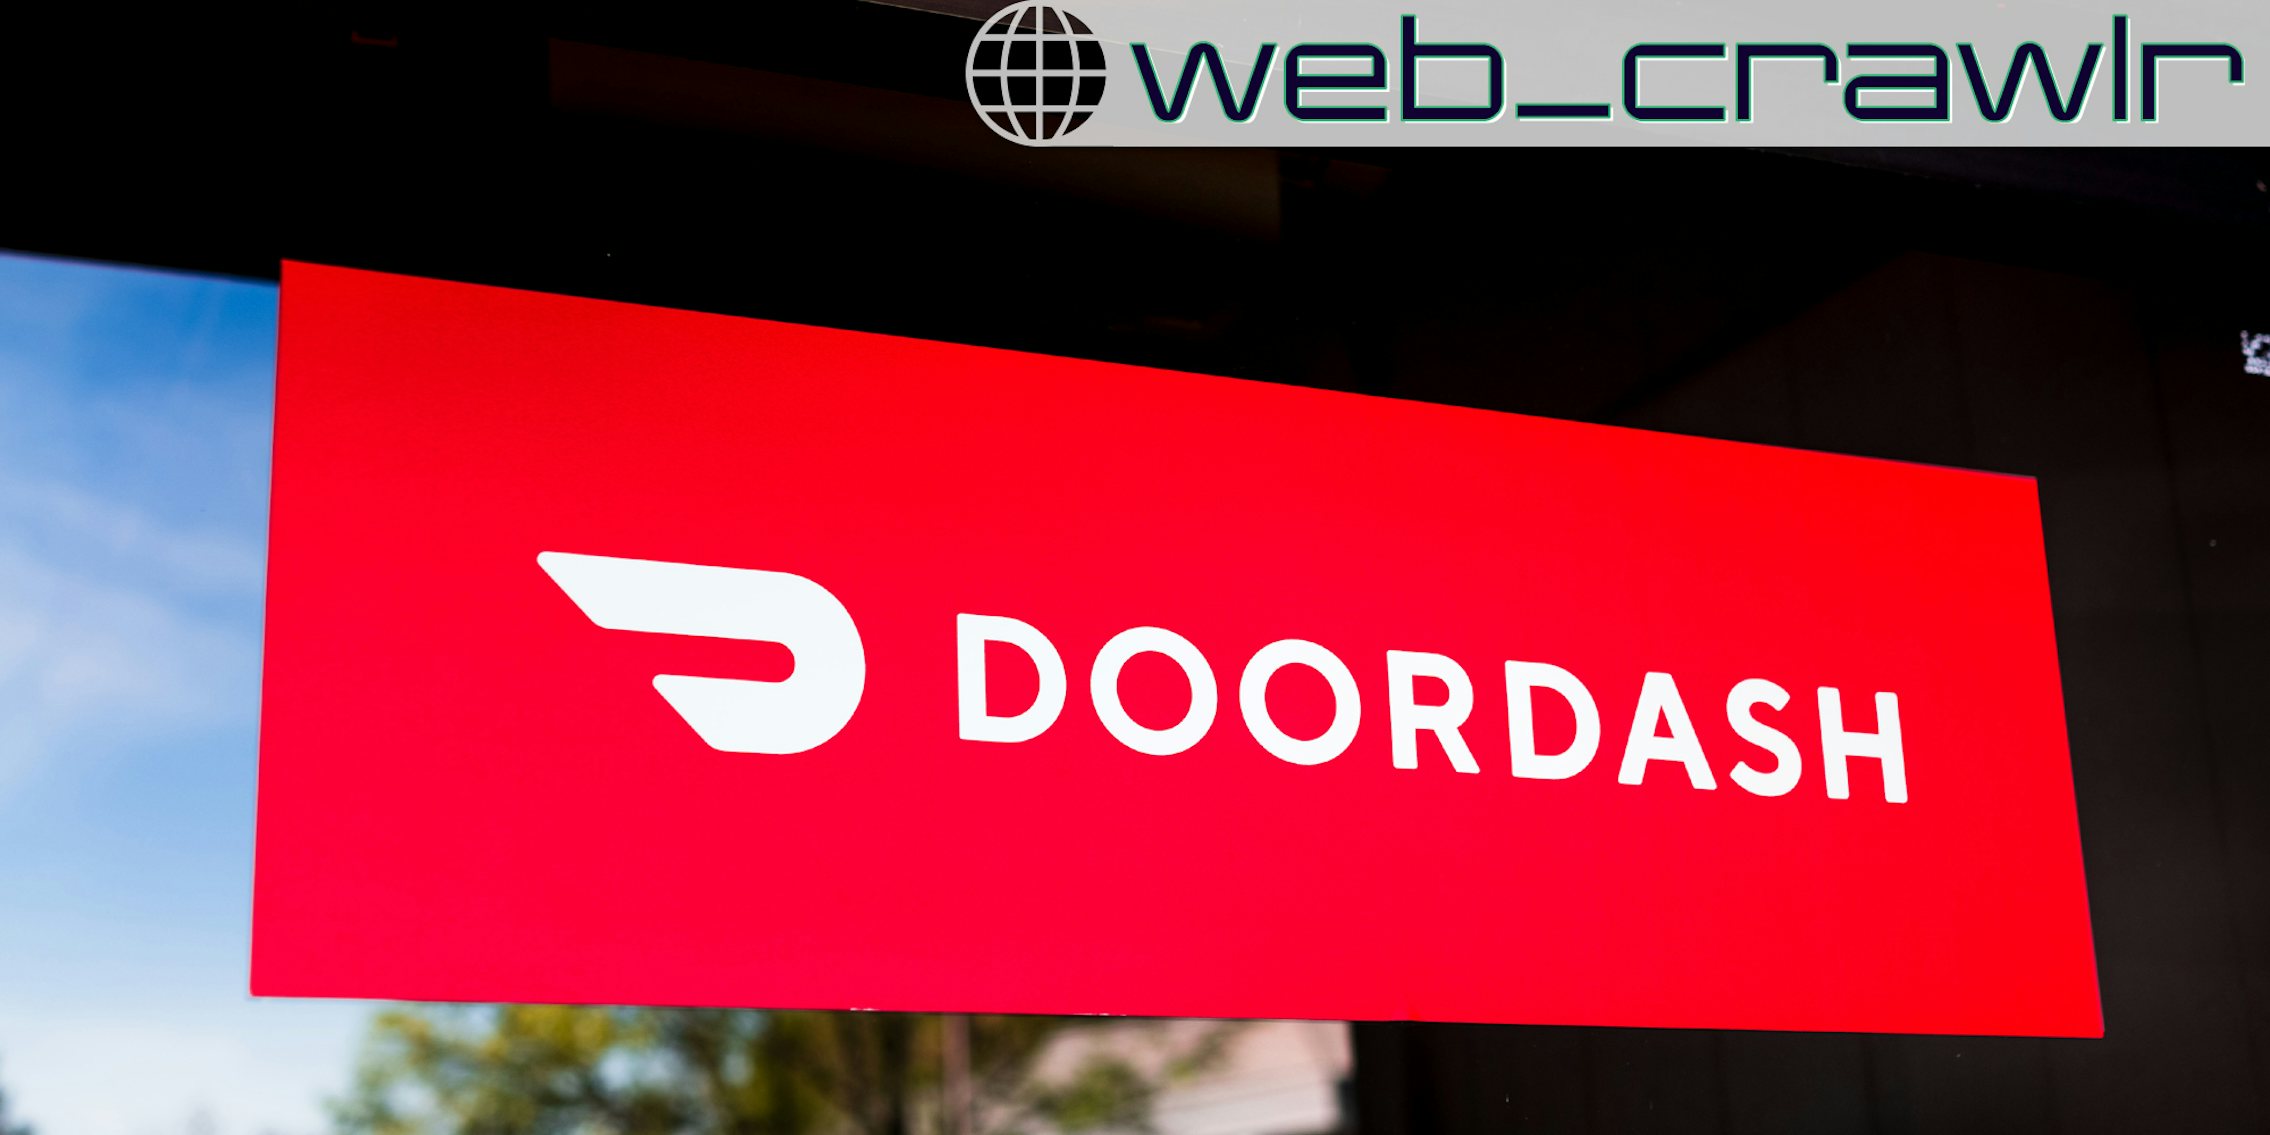 A DoorDash sign. The Daily Dot newsletter web_crawlr logo is in the top right corner.